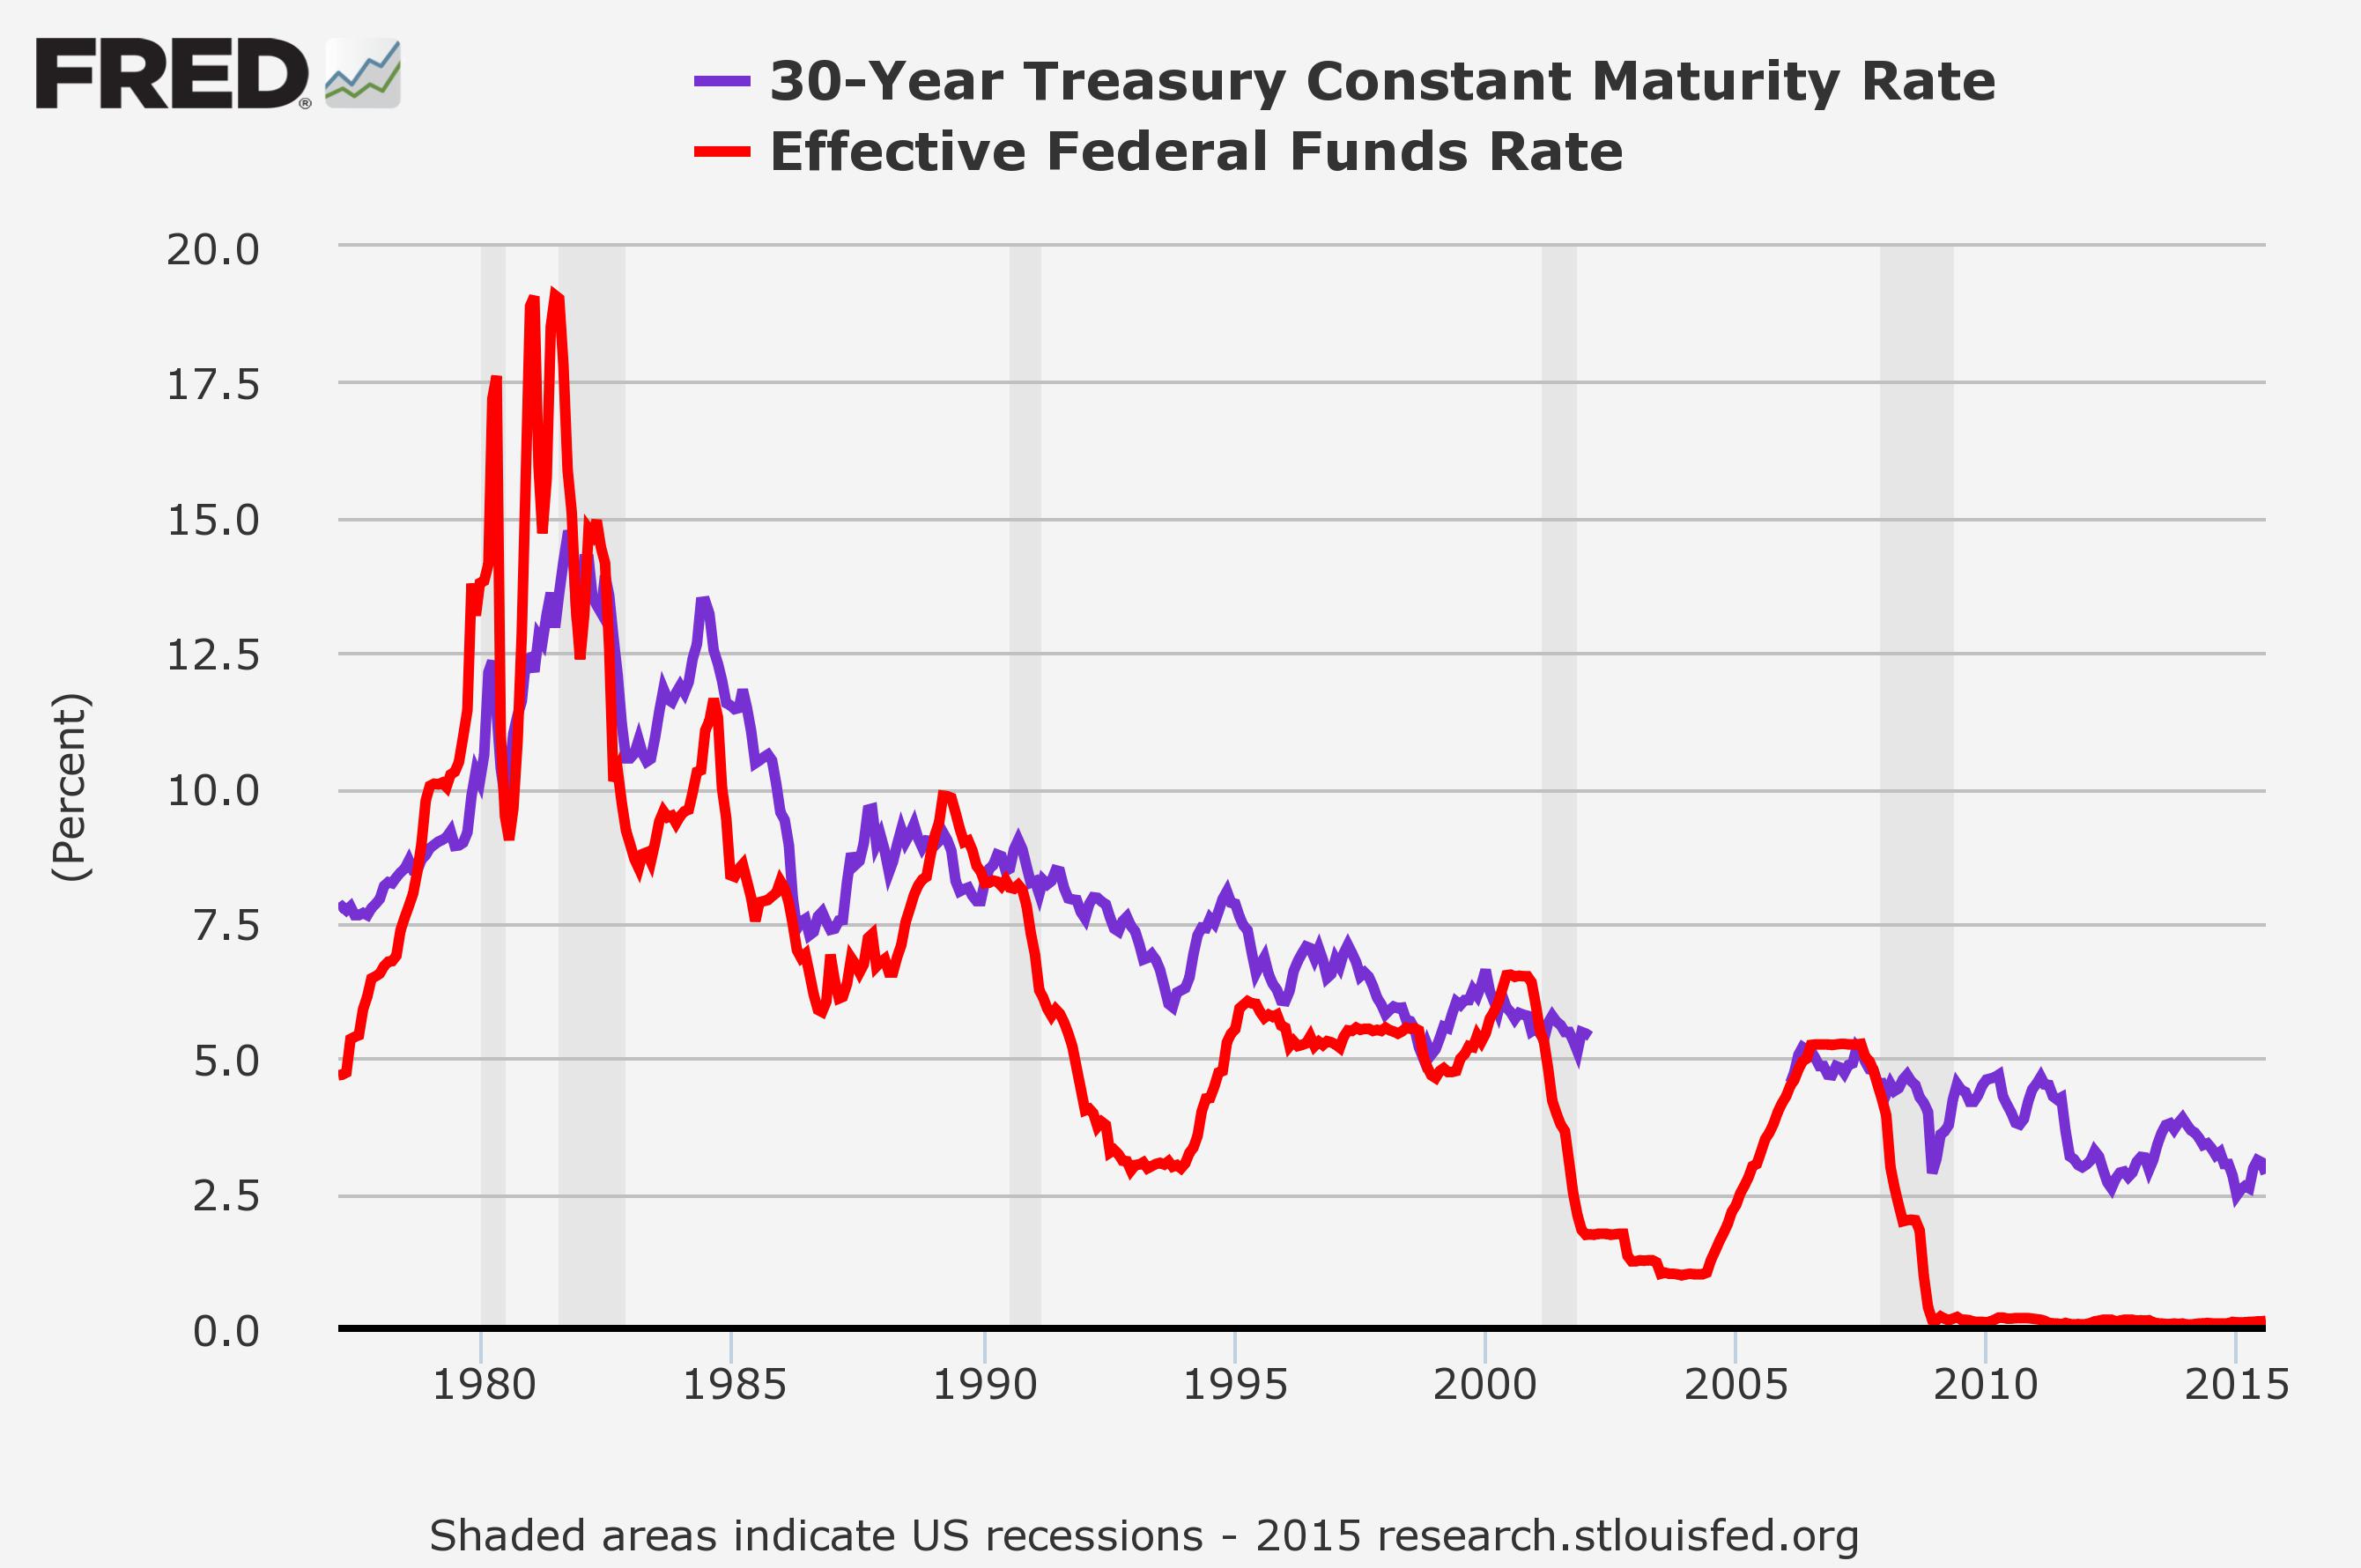 GARY SHILLING: The 30-year bond is going to 2%